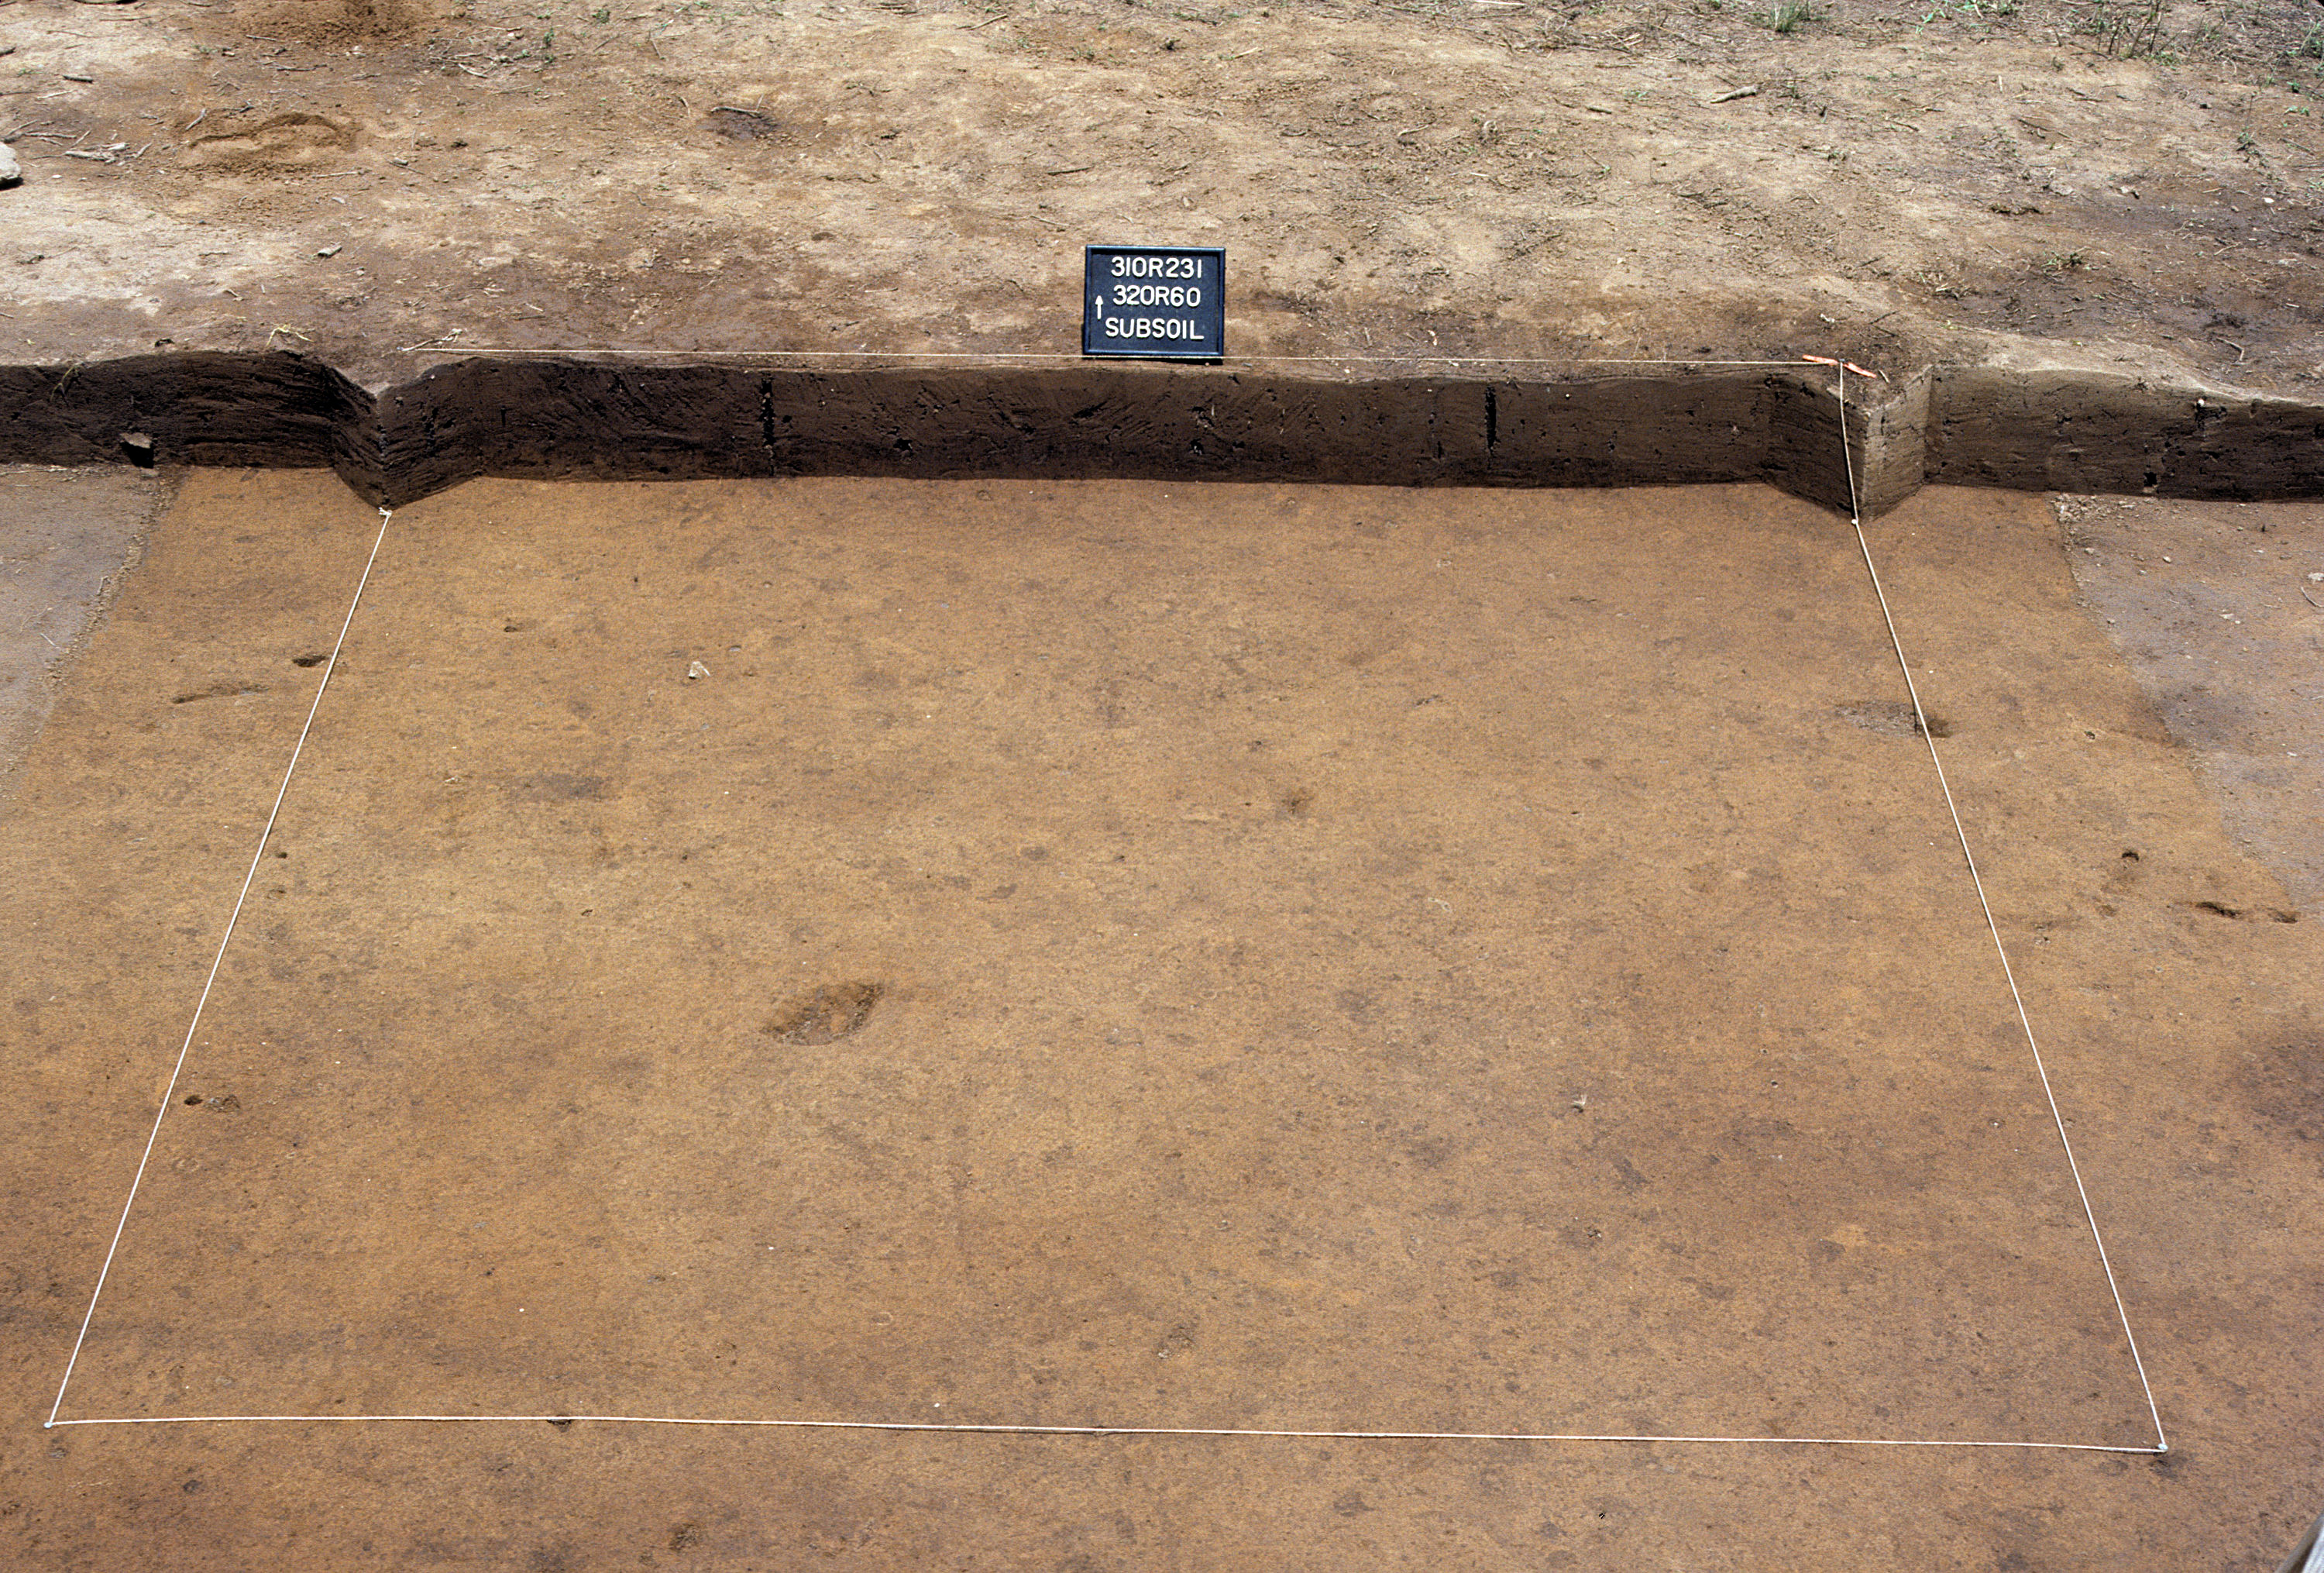 Figure 1031. Sq. 320R60 at top of subsoil (view to north).